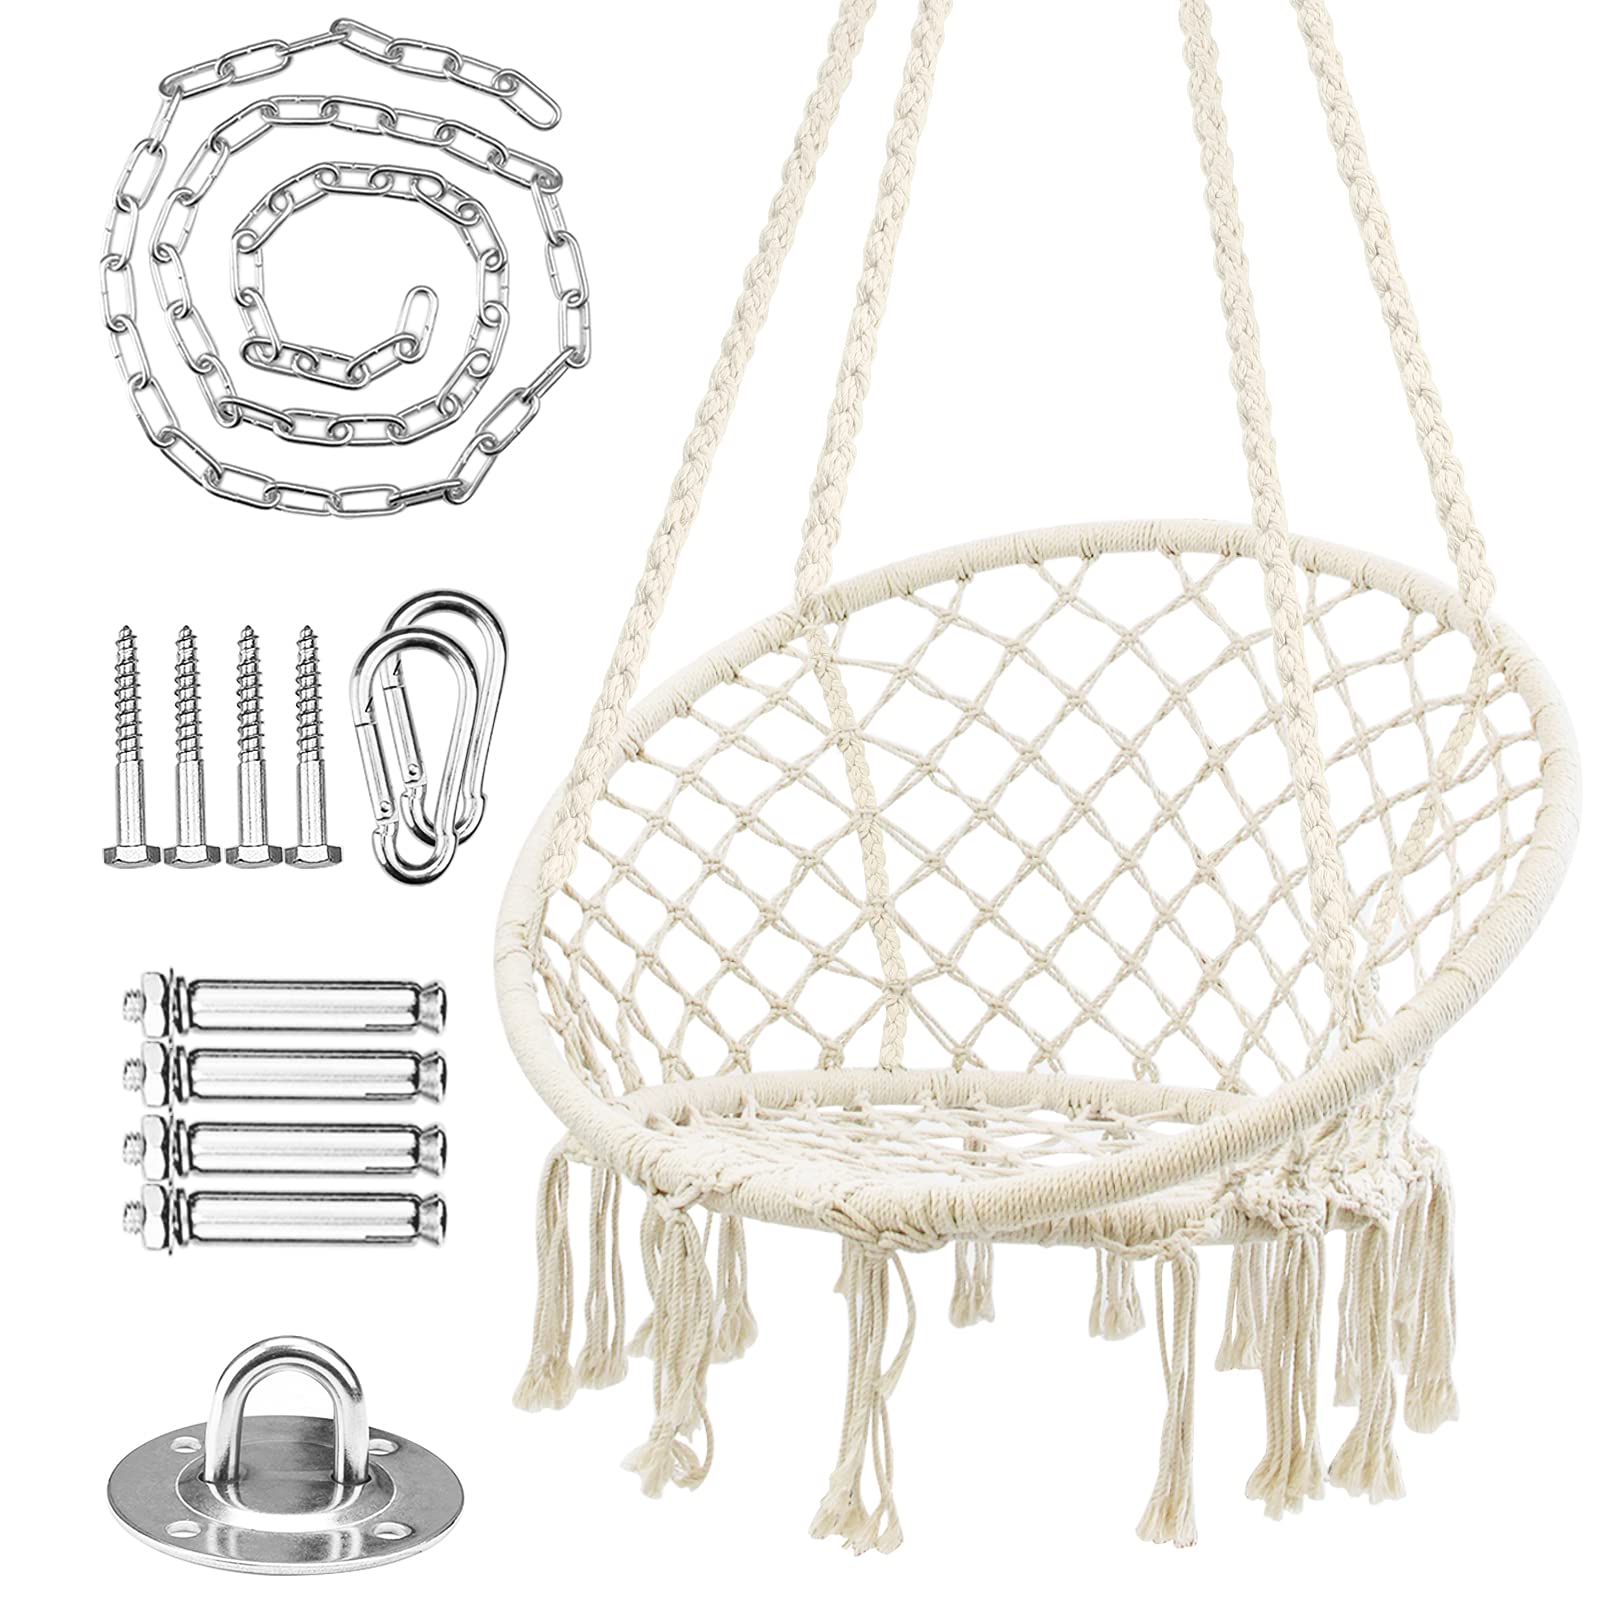 WBHome Hammock Chair Swing w/Hardware Kit, Cotton Rope Hanging Macrame Swing Chair for Bedroom, Patio, Yard, Indoor, Outdoor, Max Weight 265 Lbs (Beige)